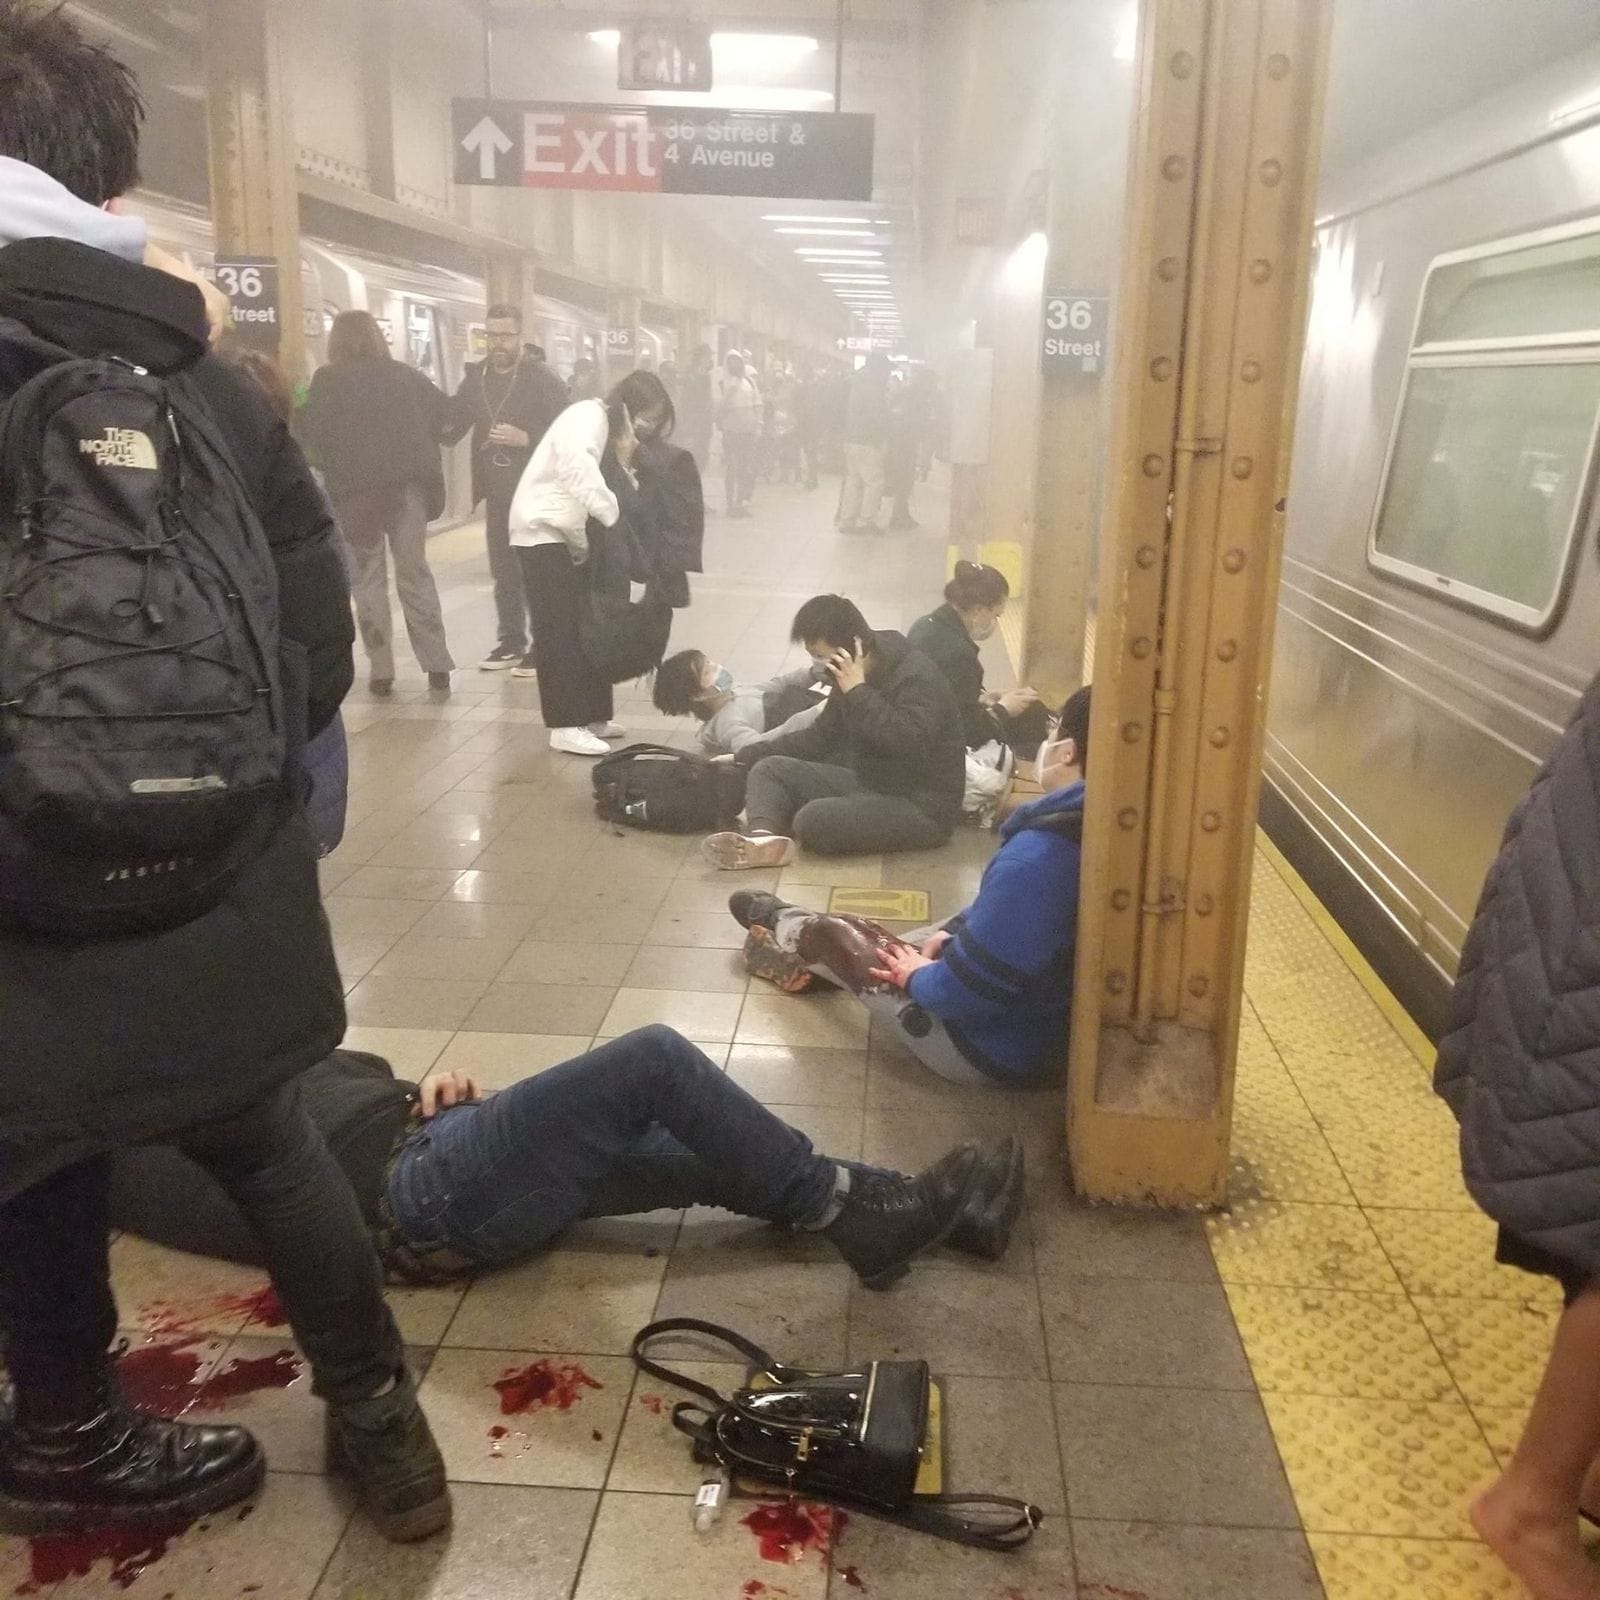 Shooting incident in New York subway, 13 people injured